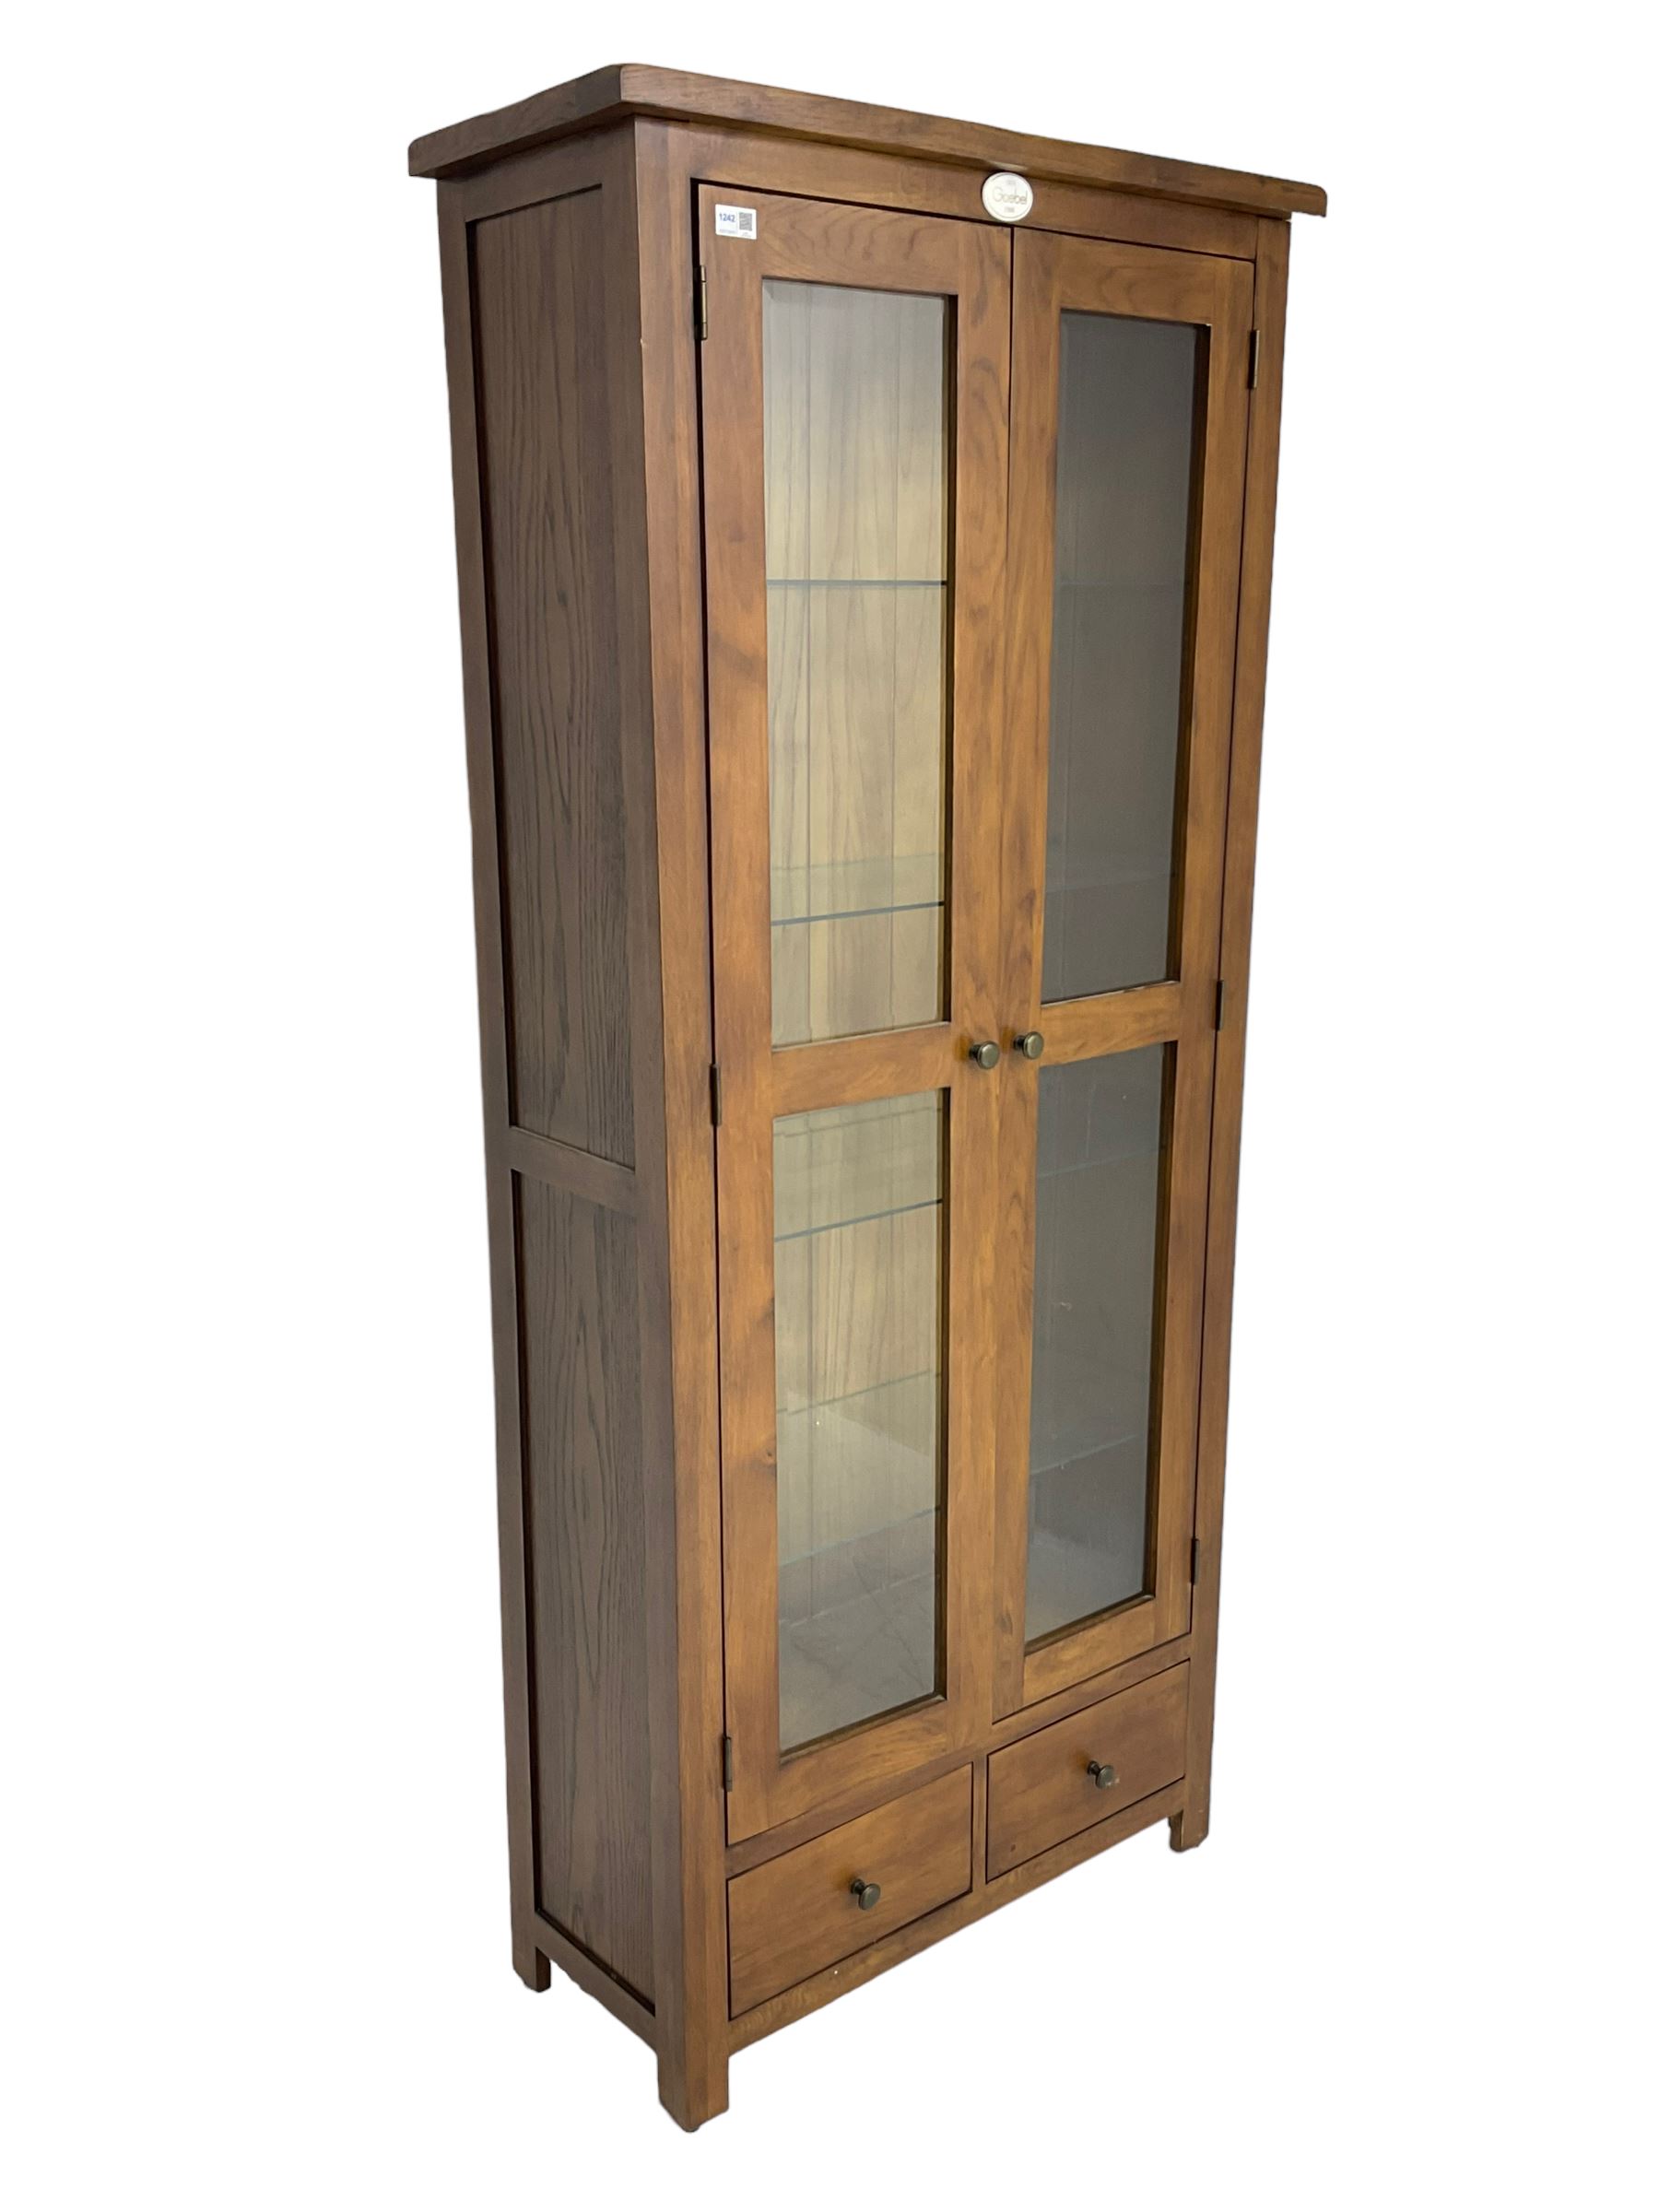 Stained oak display cabinet - Image 7 of 7